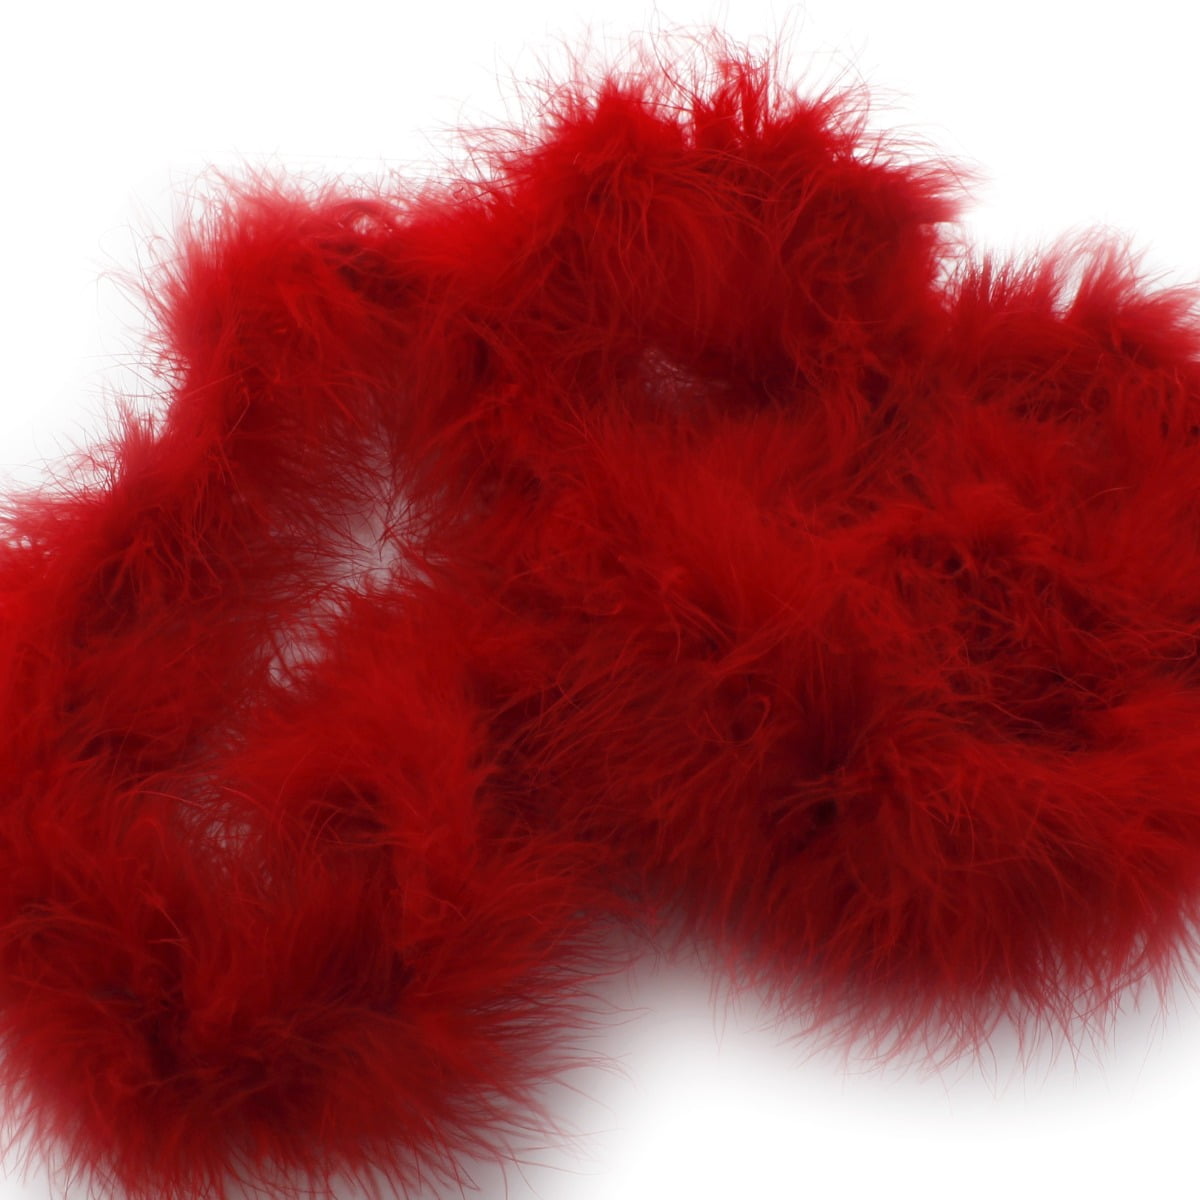 Marabou Feathers Small 1-3 fluffs RED 7 grams approx. 105 per bag